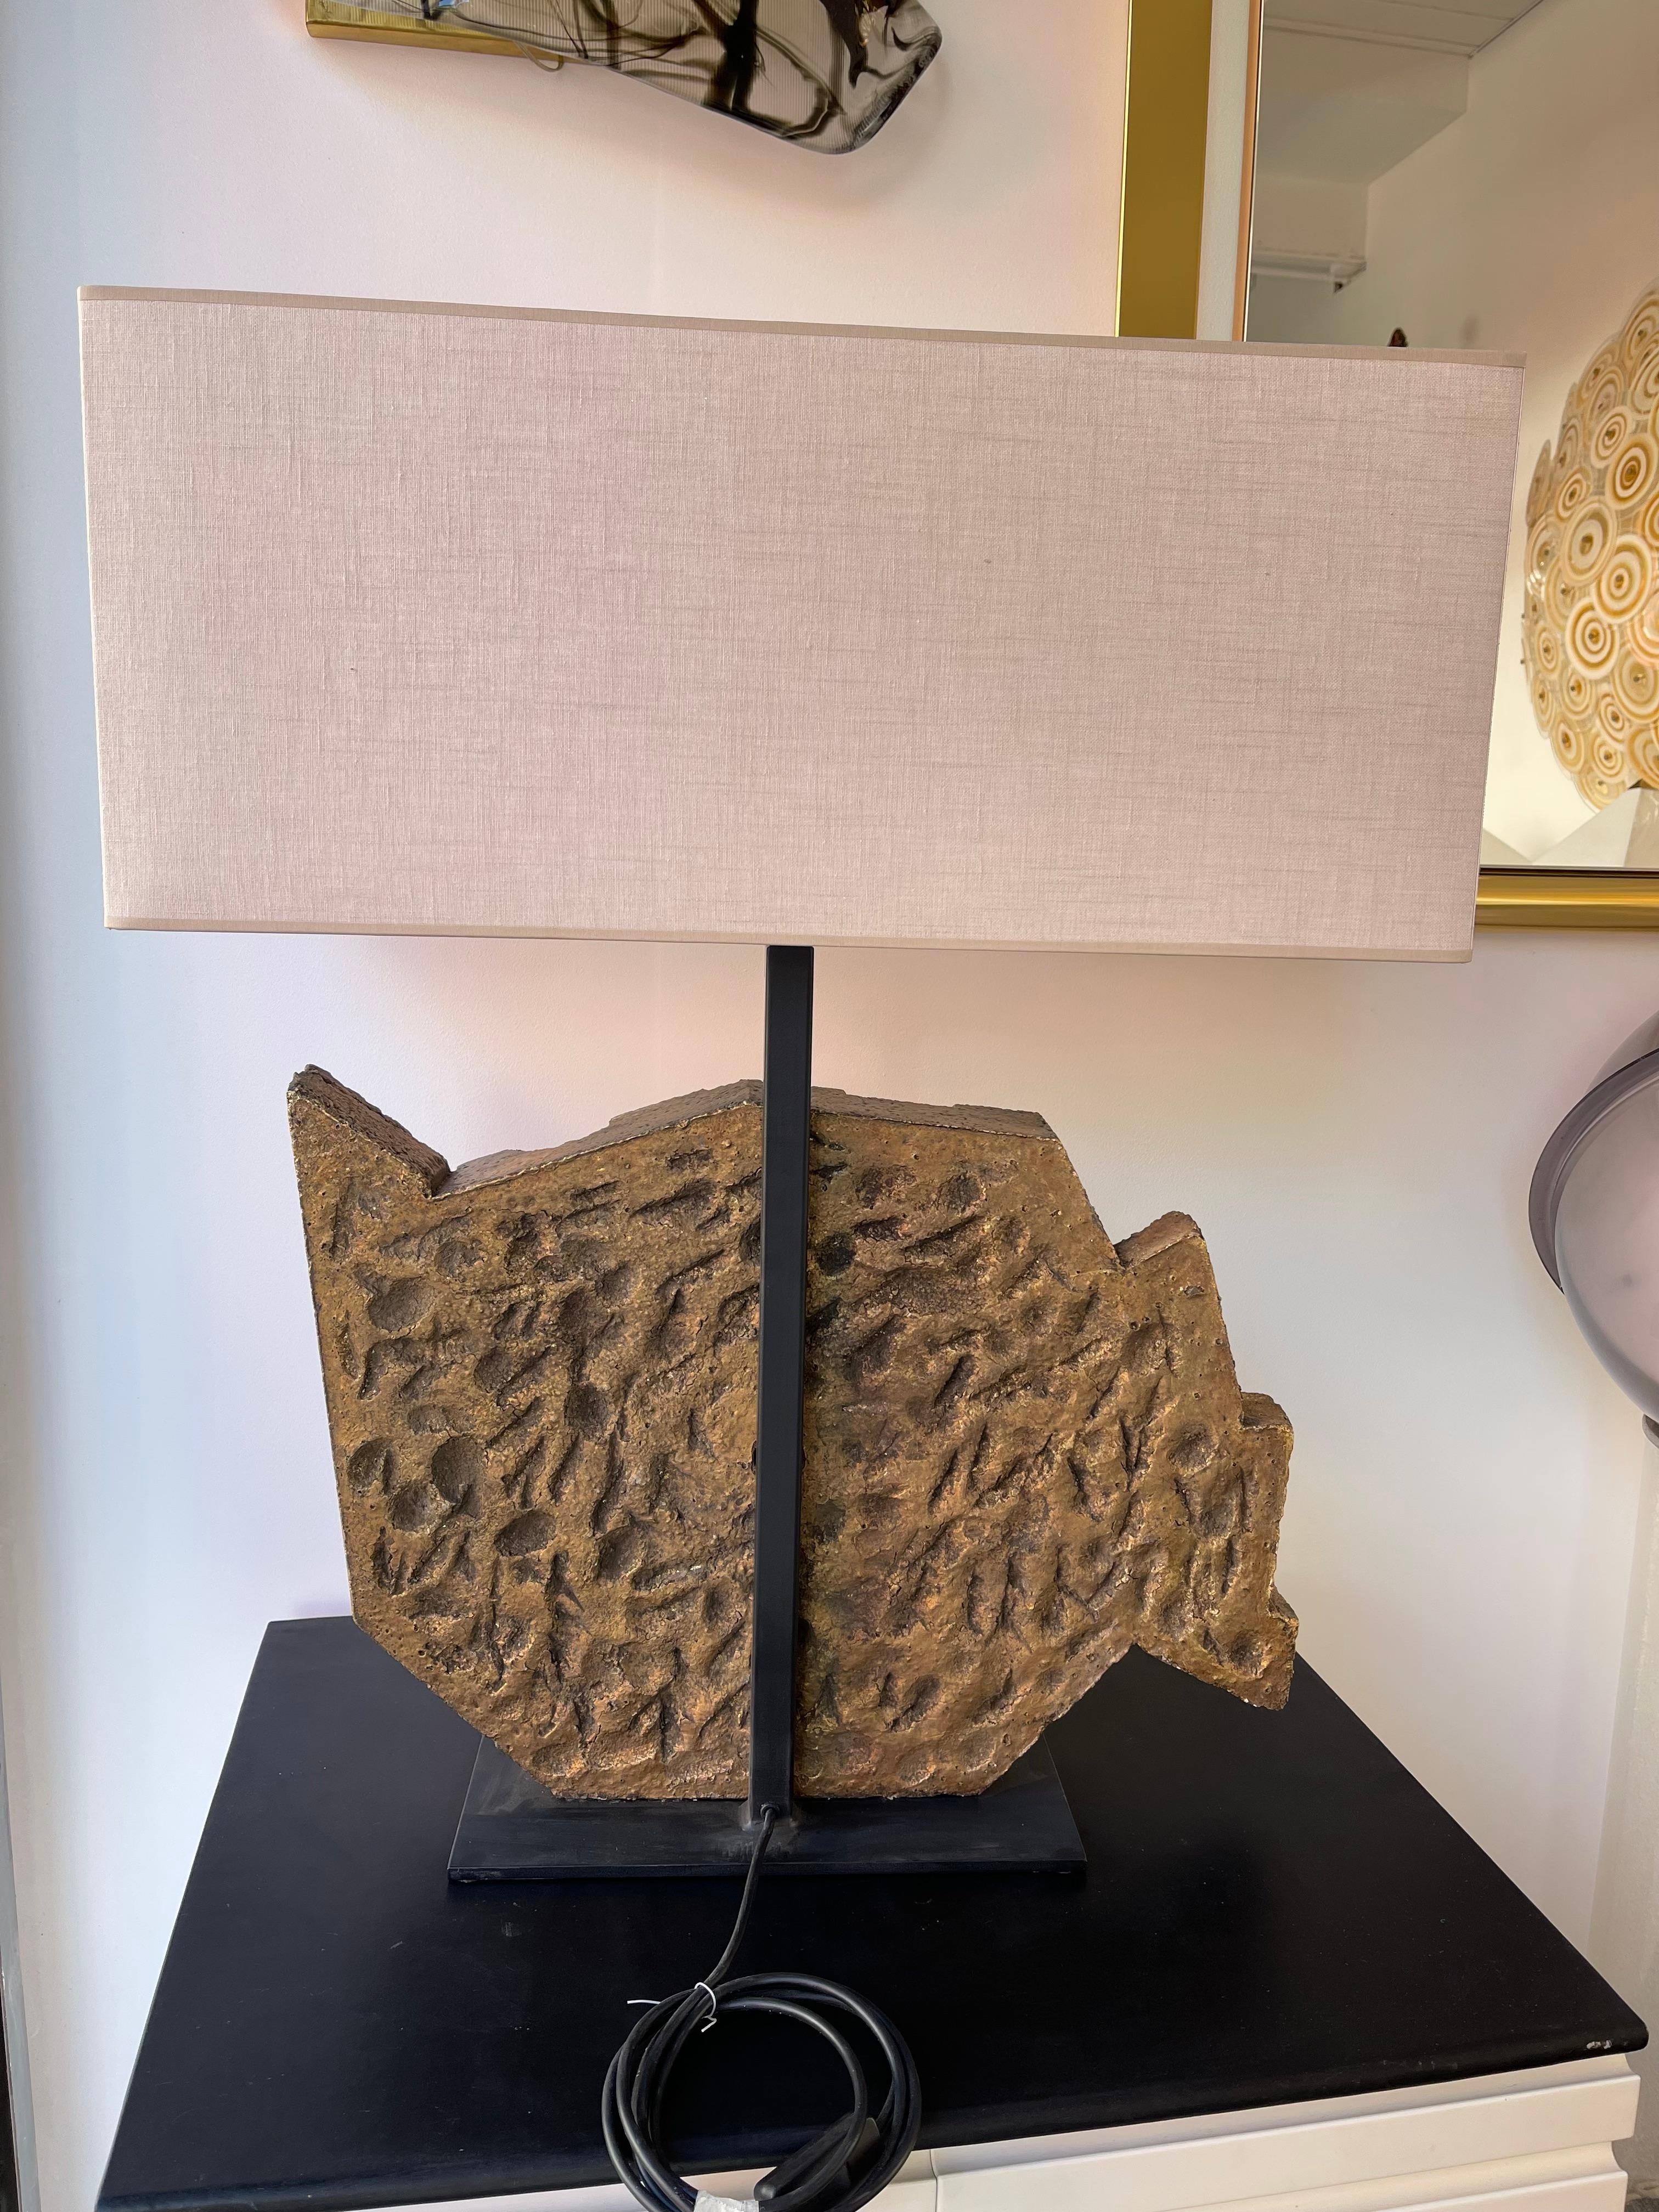 Pair of important sculpture table or bedside lamps by the italian artist Massimo Lunari, he has worked for the famous architects Savioli or Spadolini. The sculpture are made in gilt gold concrete mounted on a black lacquered structure, nice shades